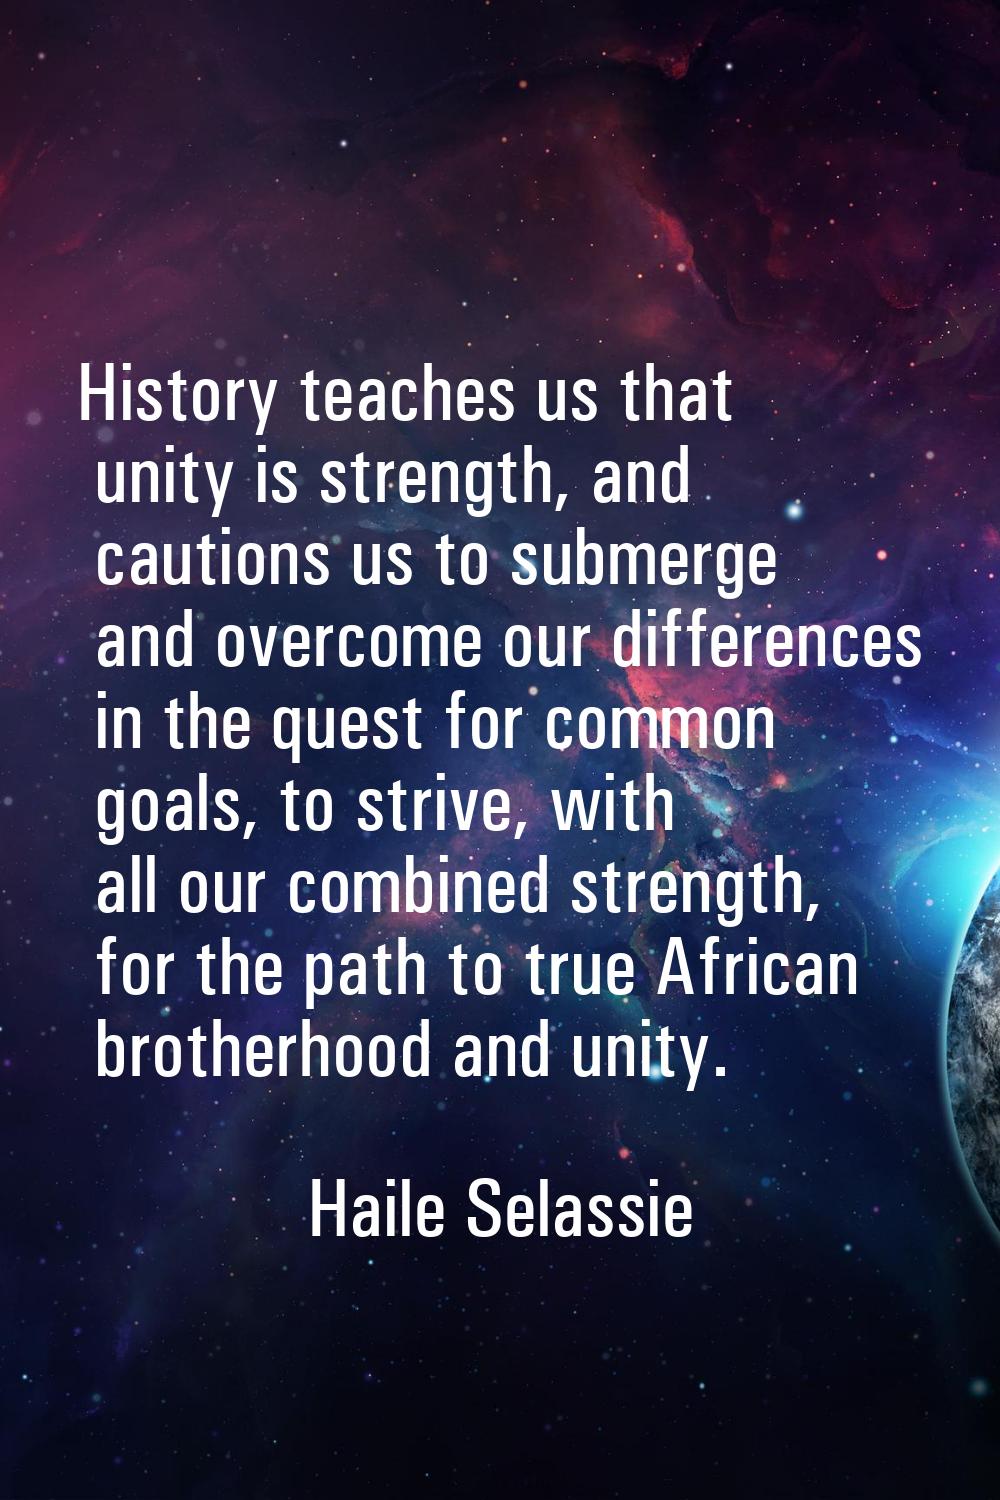 History teaches us that unity is strength, and cautions us to submerge and overcome our differences